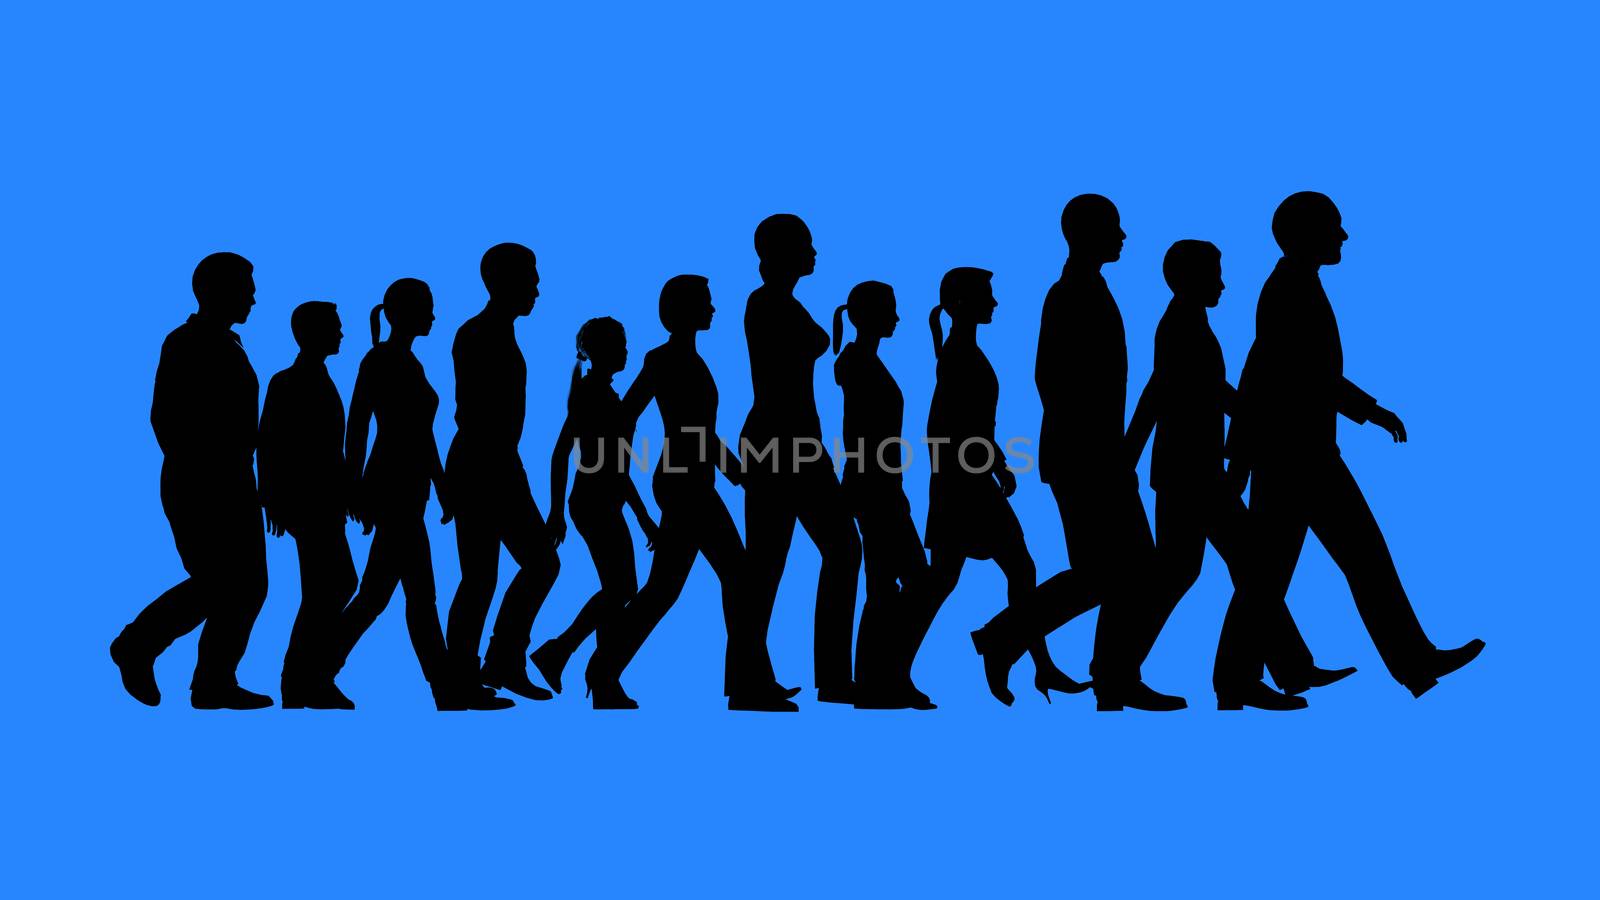 Group of people walking silhouettes by kravcs